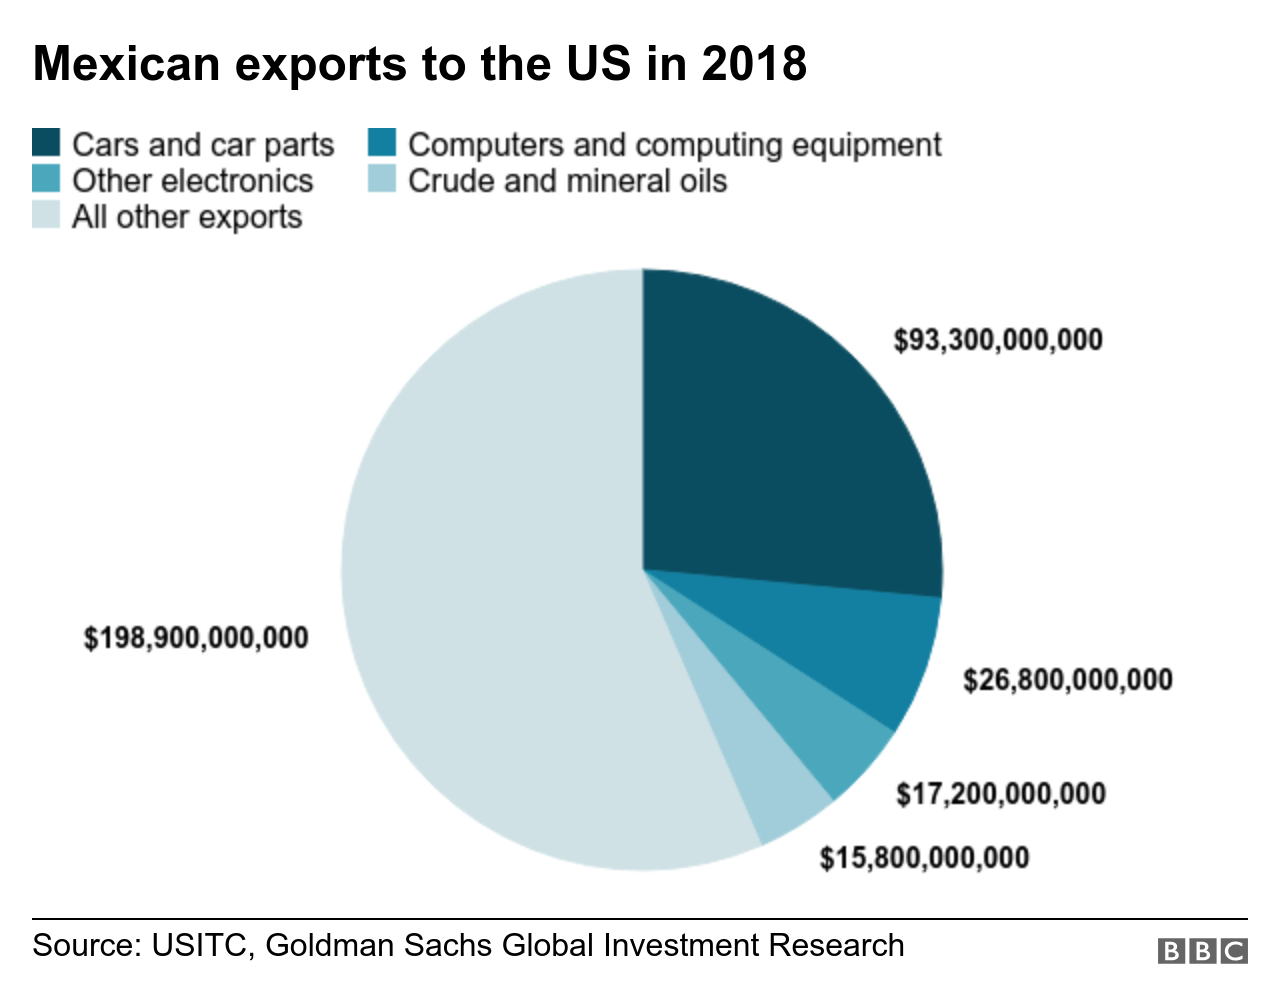 A pie chart showing Mexico exports to the US